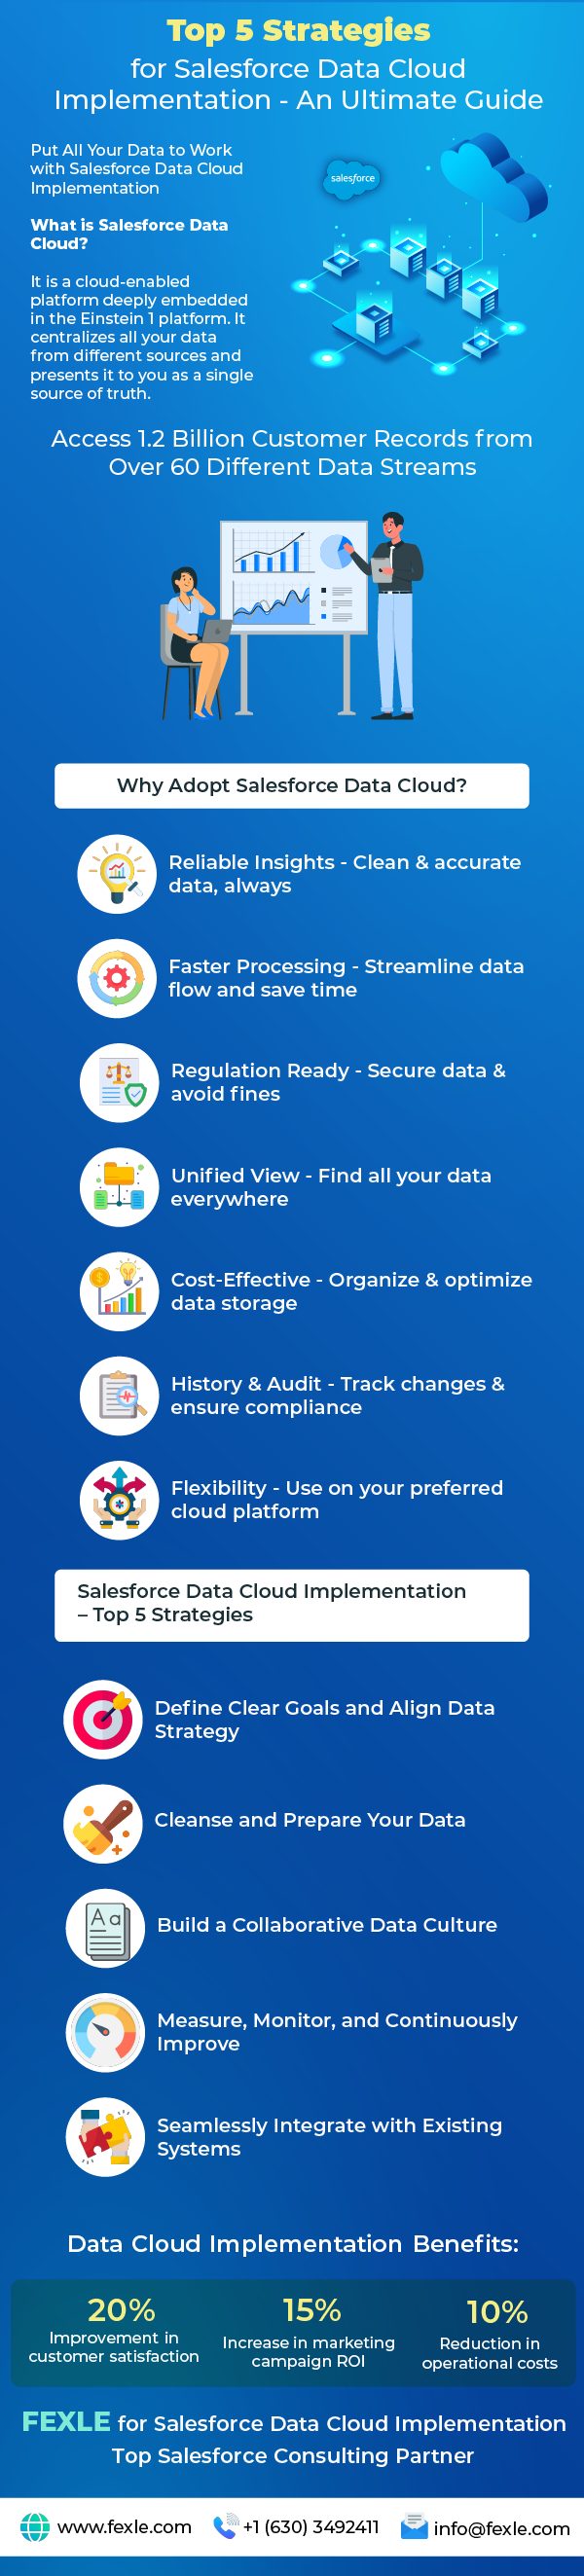 Unleash the Power of Unified Data with FEXLE’s Data Cloud Implementation